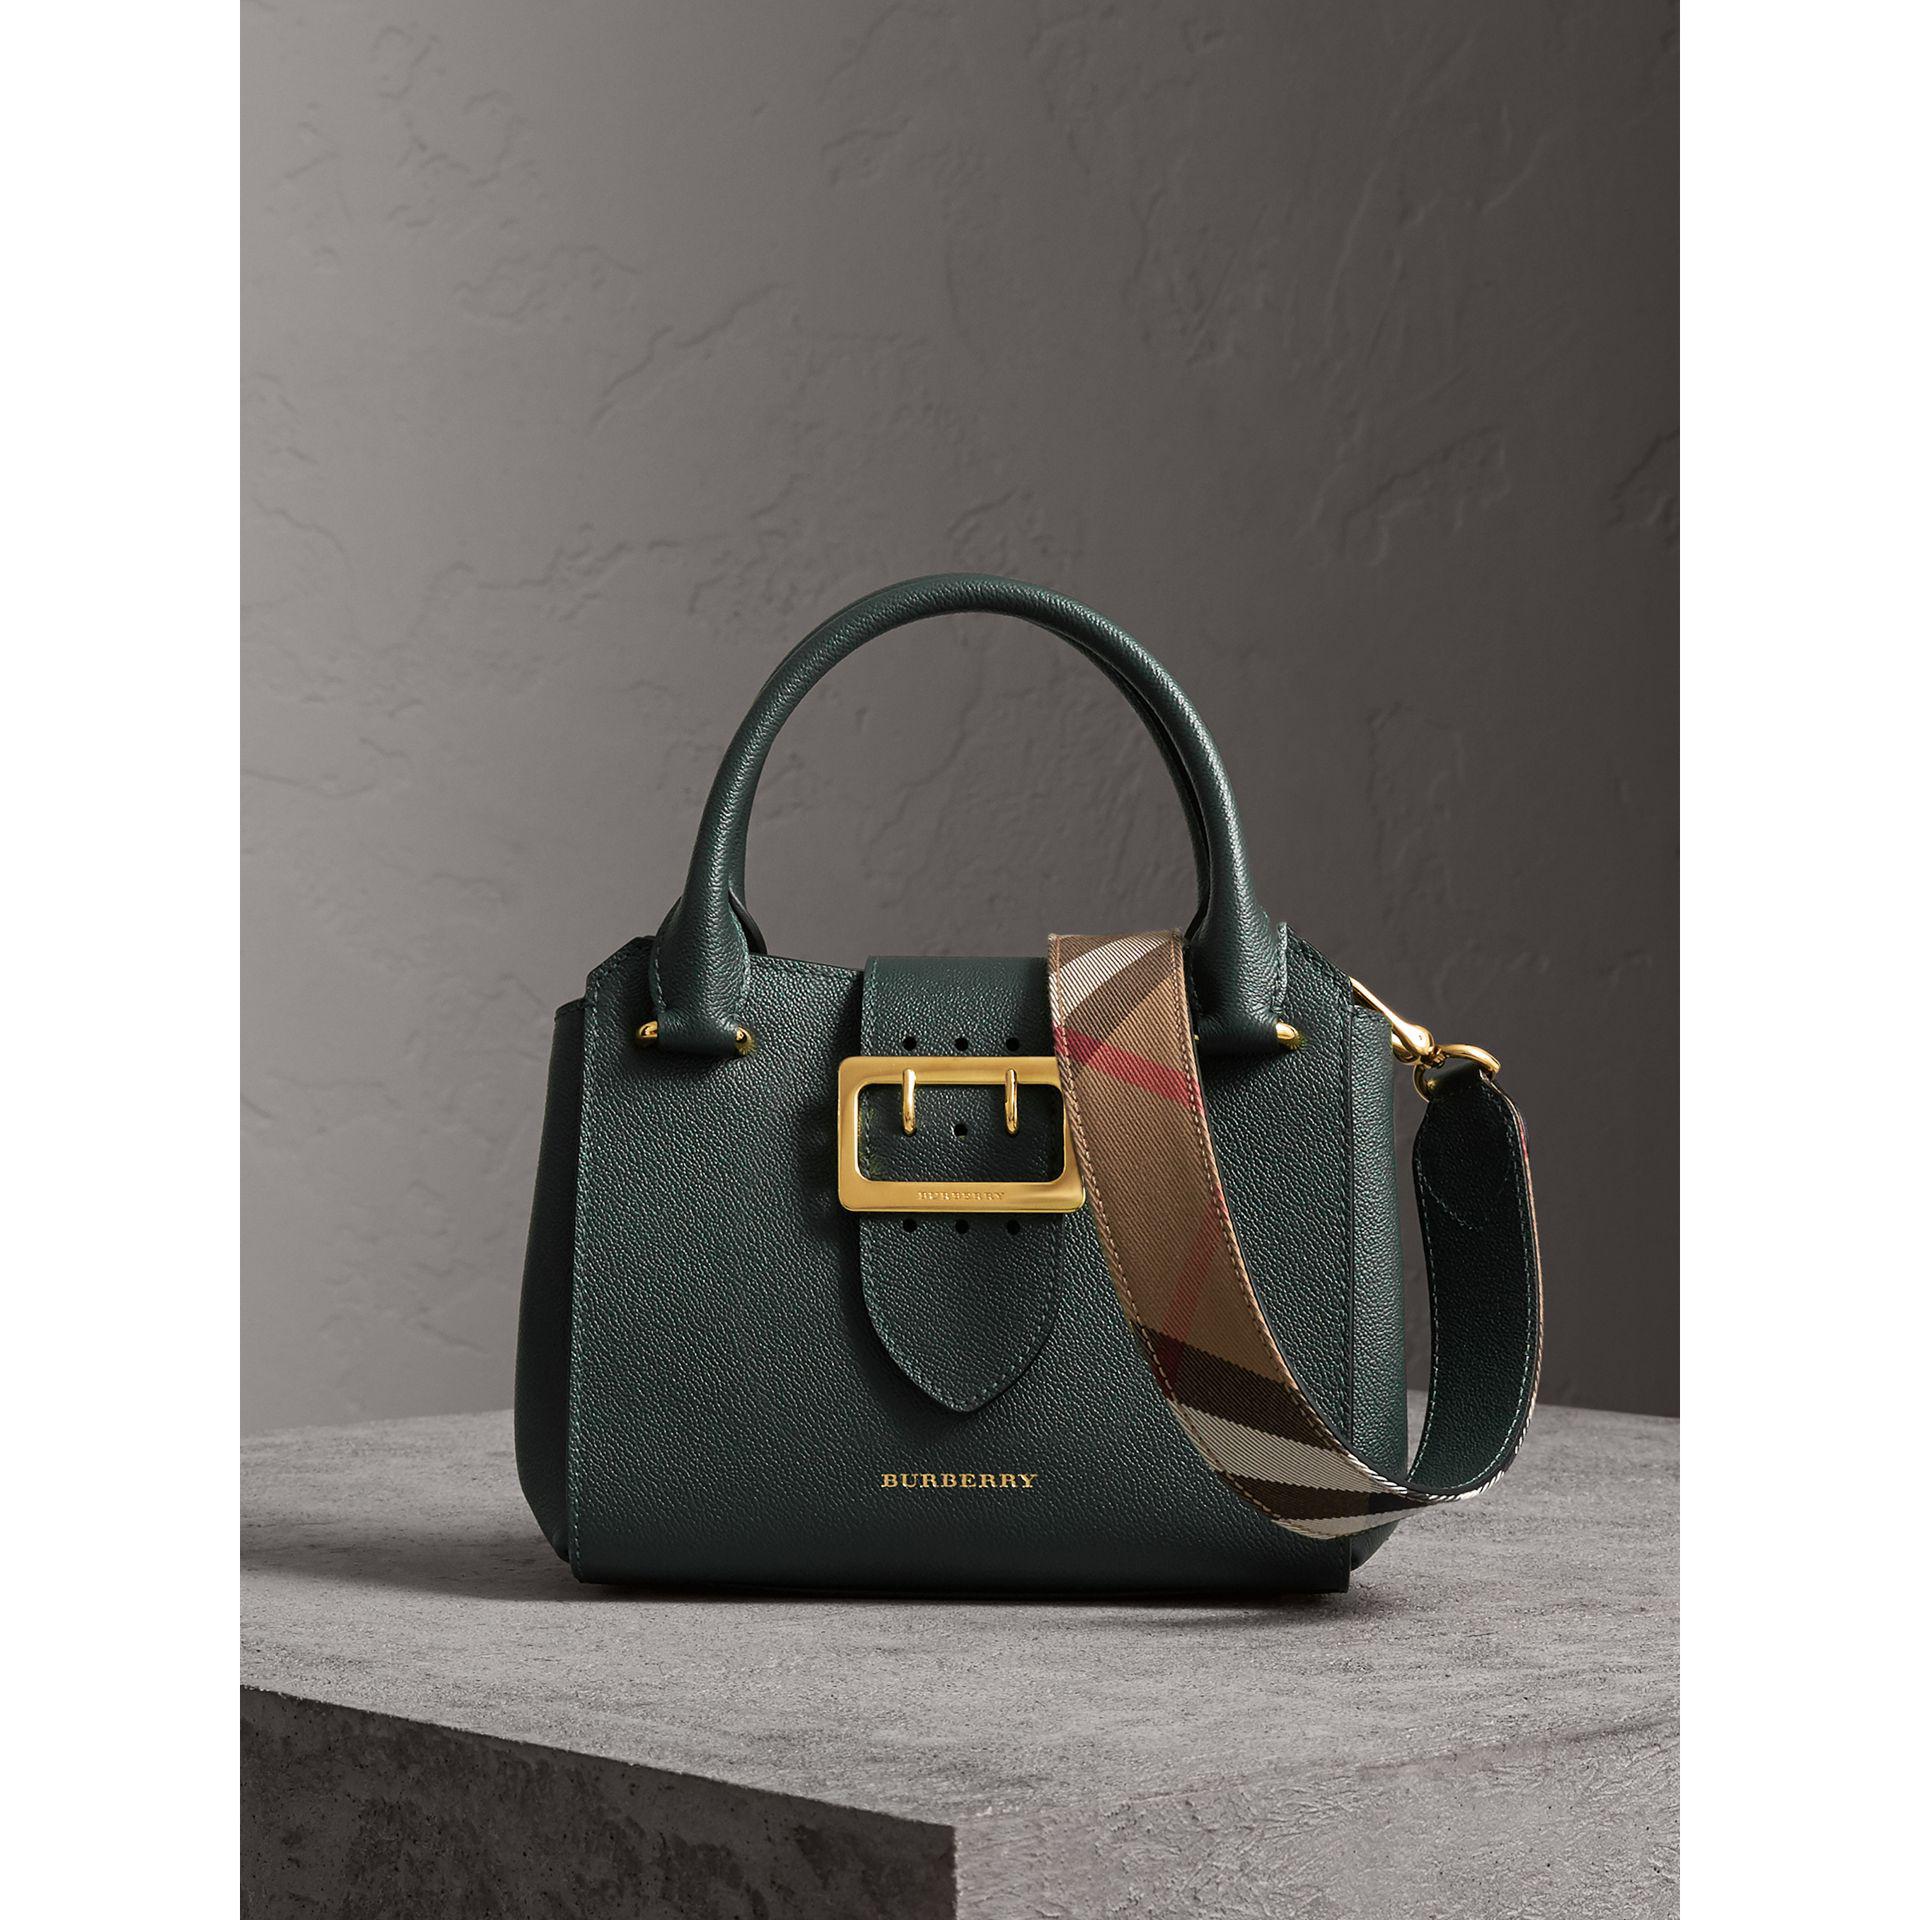 Burberry Small Buckle Tote Hotsell, 58% OFF | www.gruposincom.es